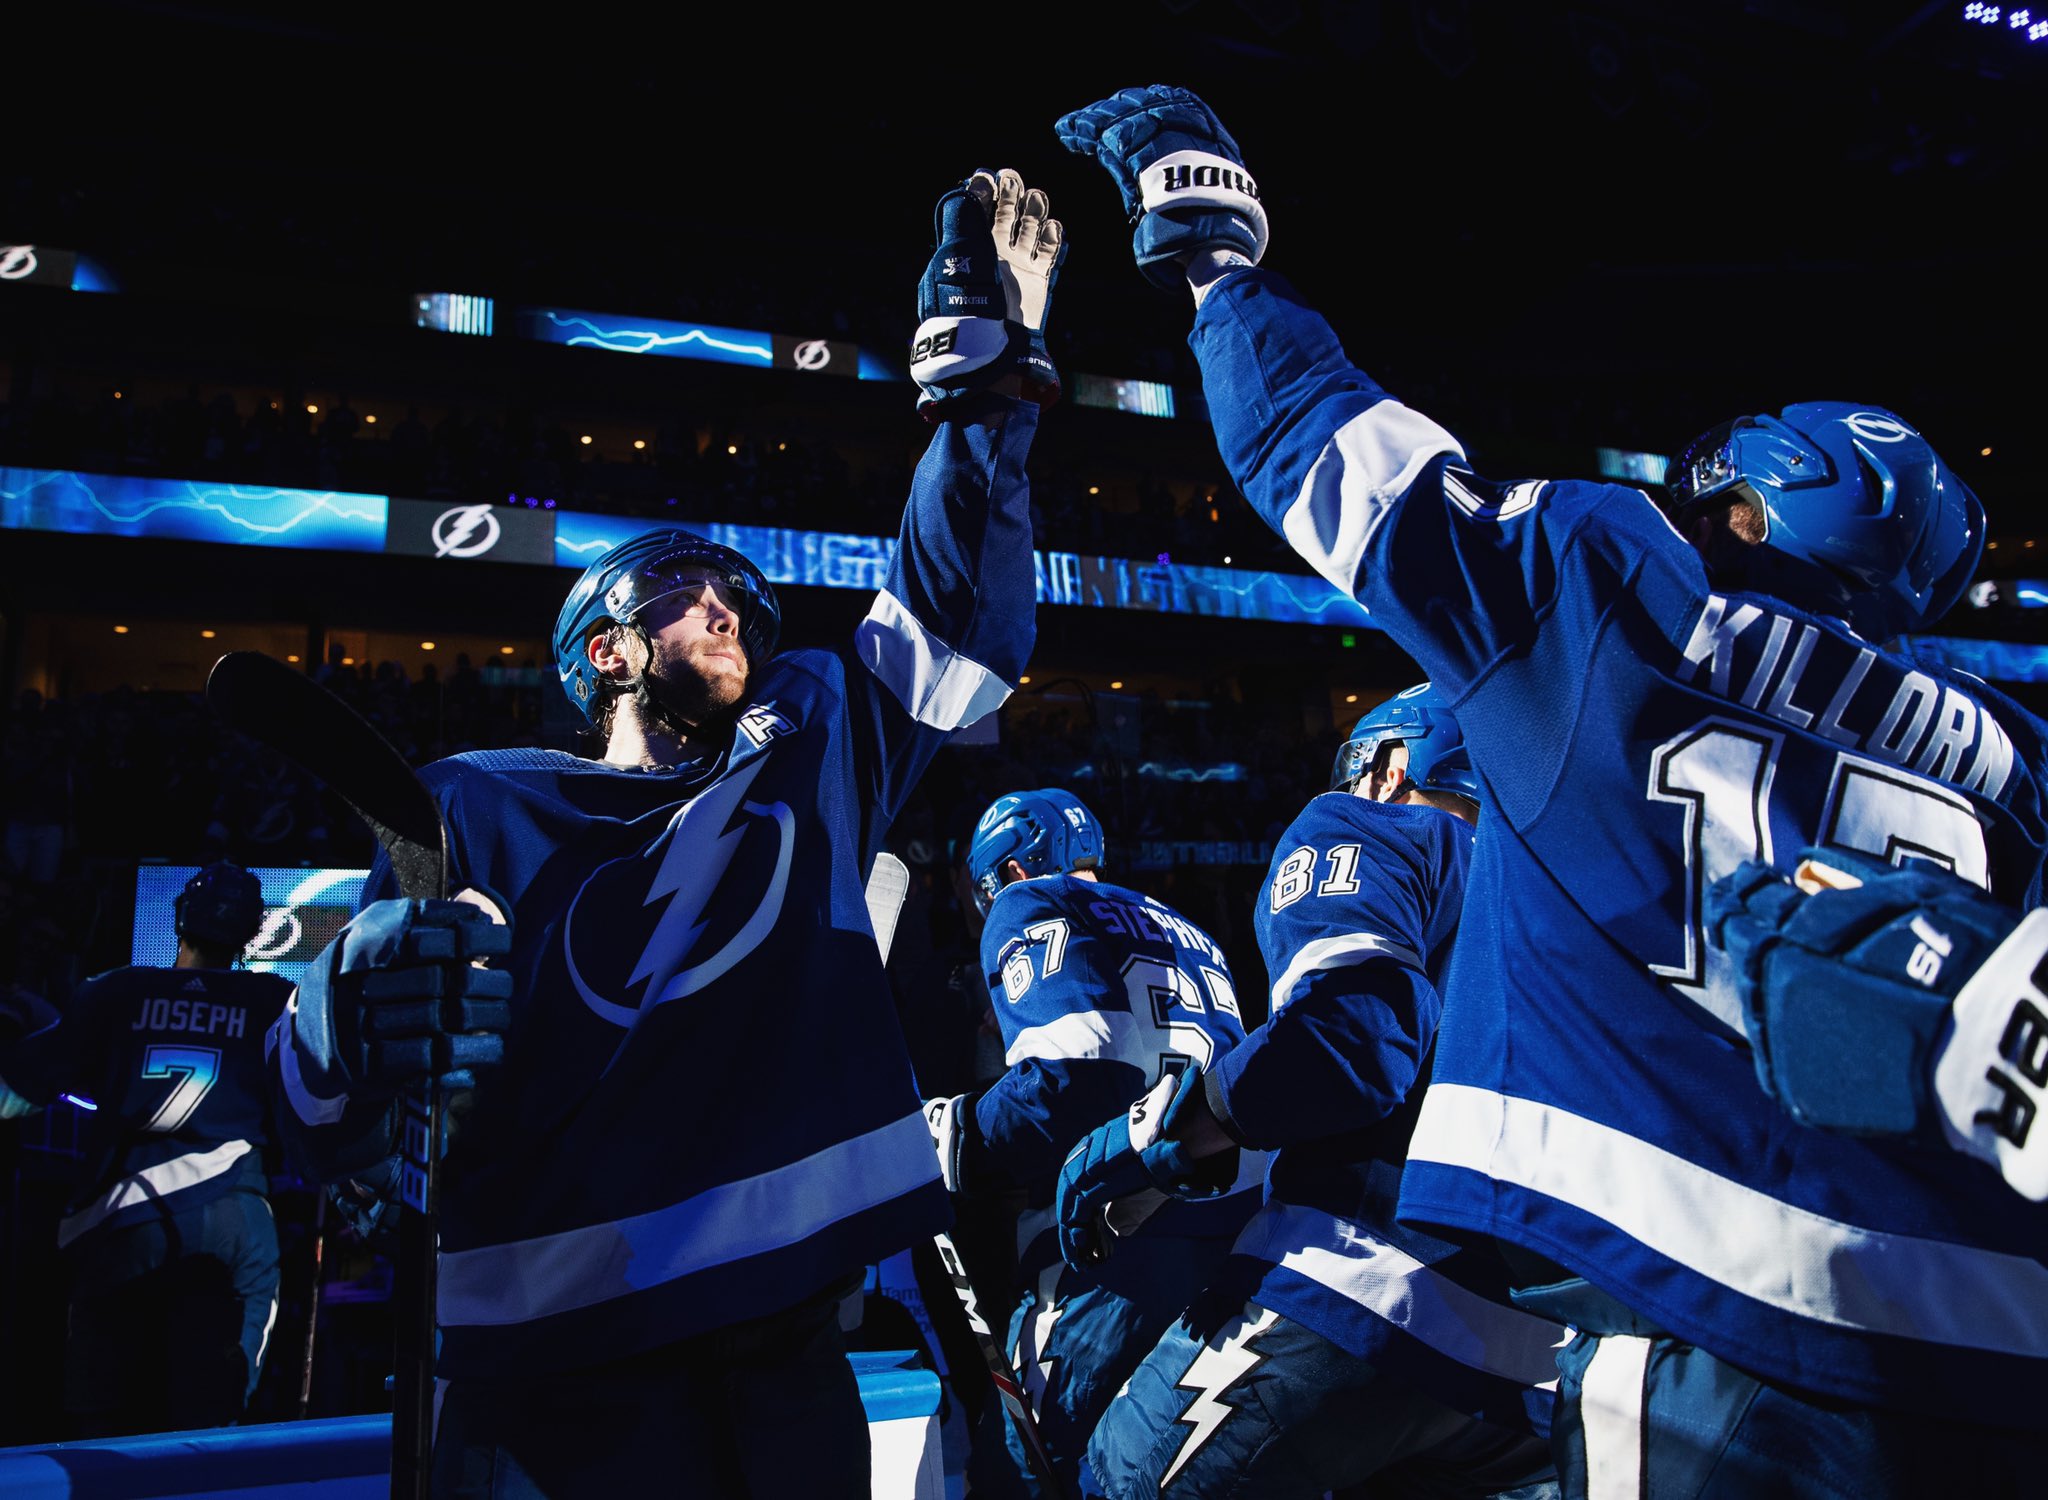 Lightning look to end 4-game skid vs. Flames